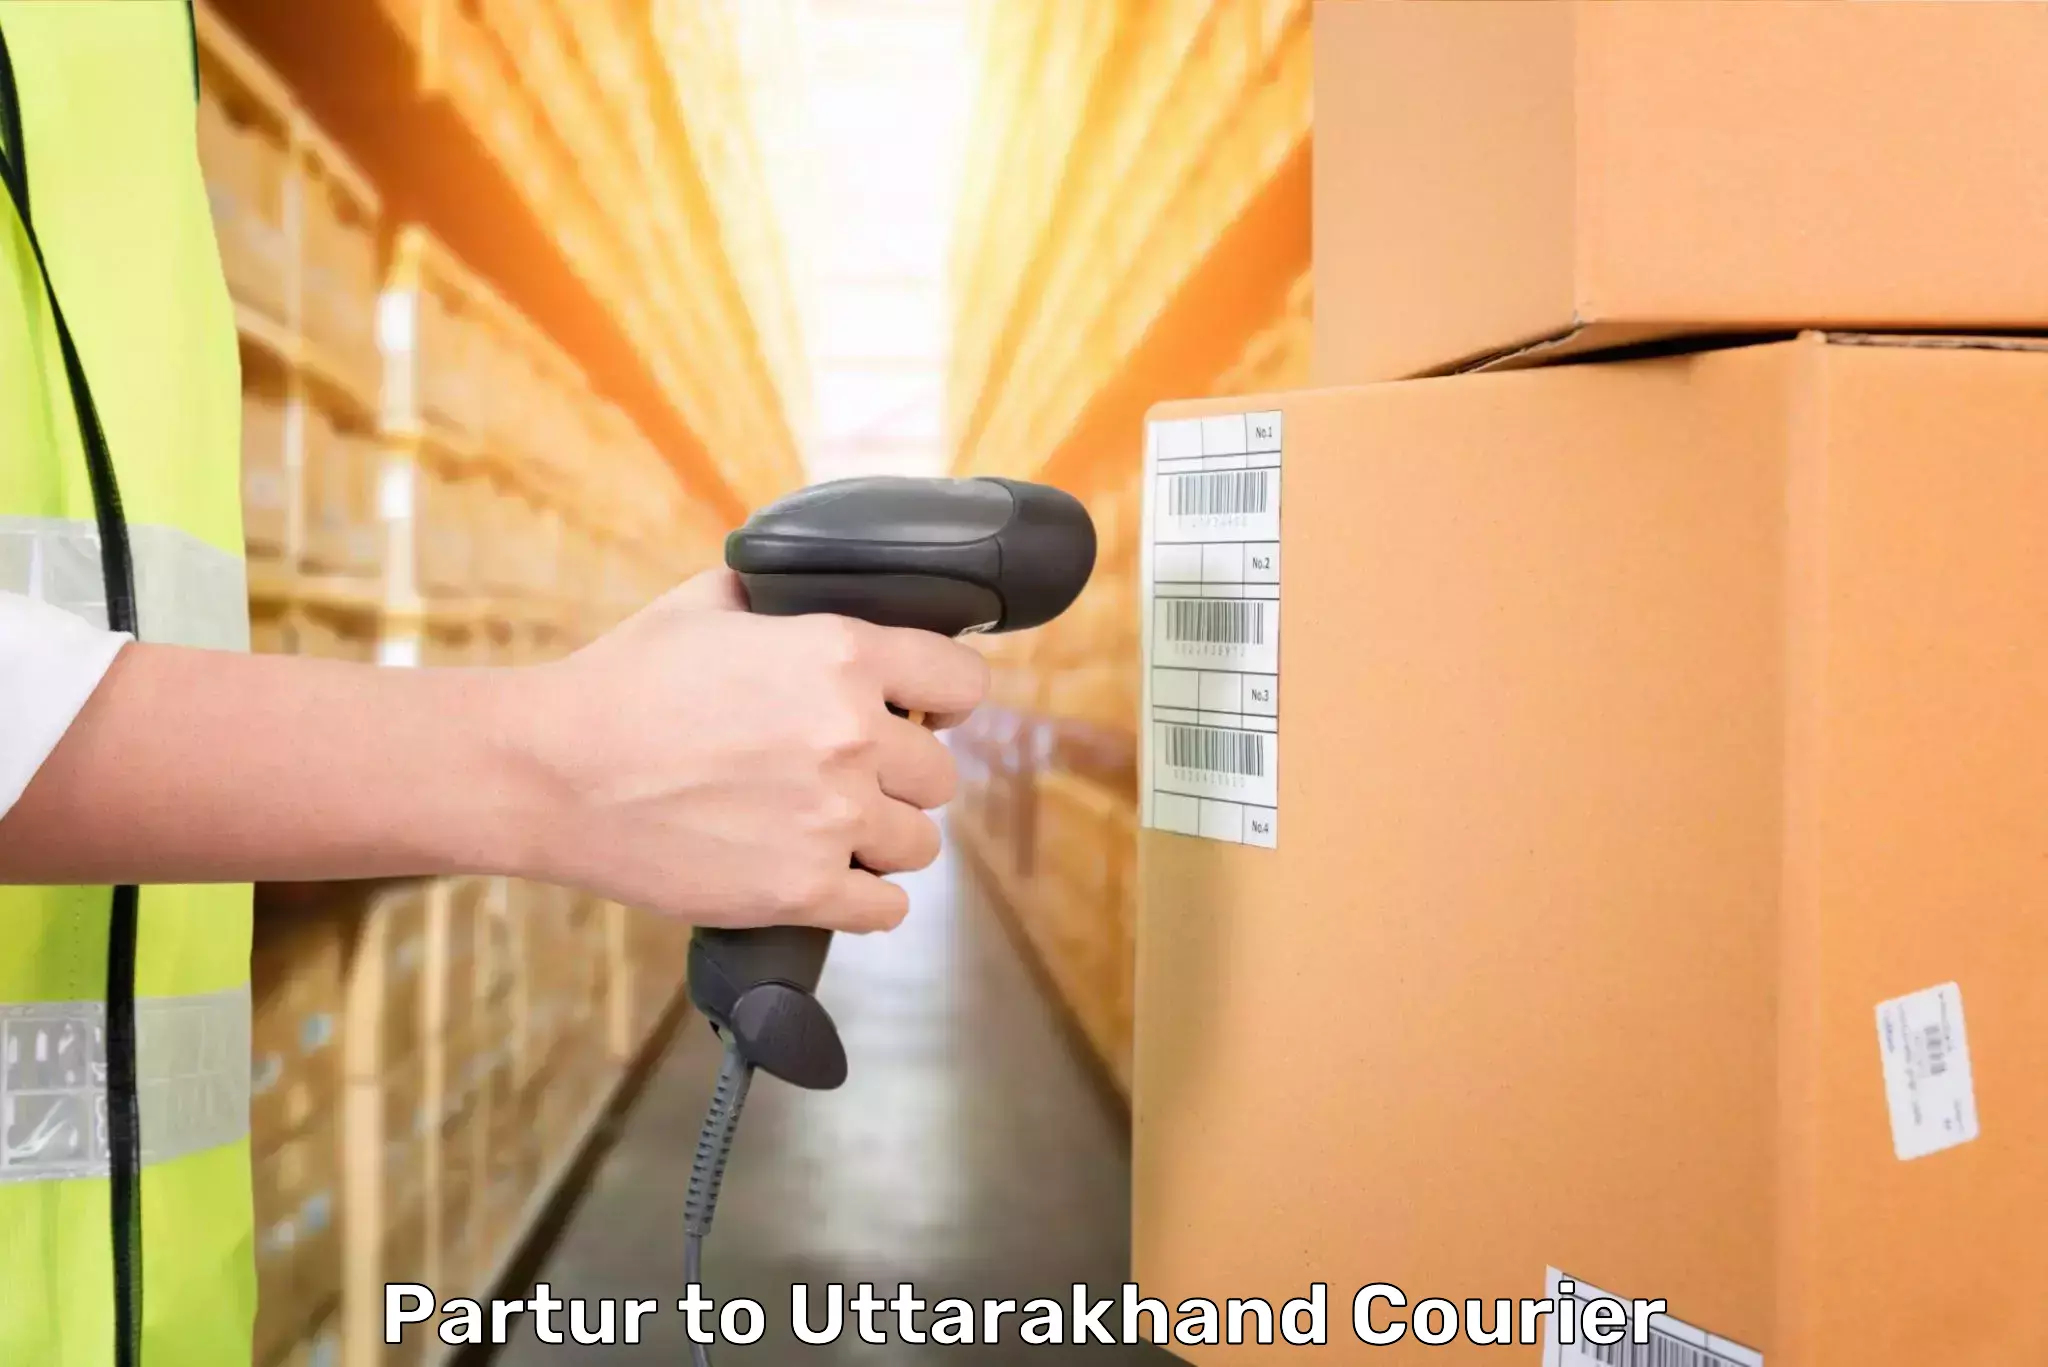 Express baggage shipping Partur to Uttarakhand